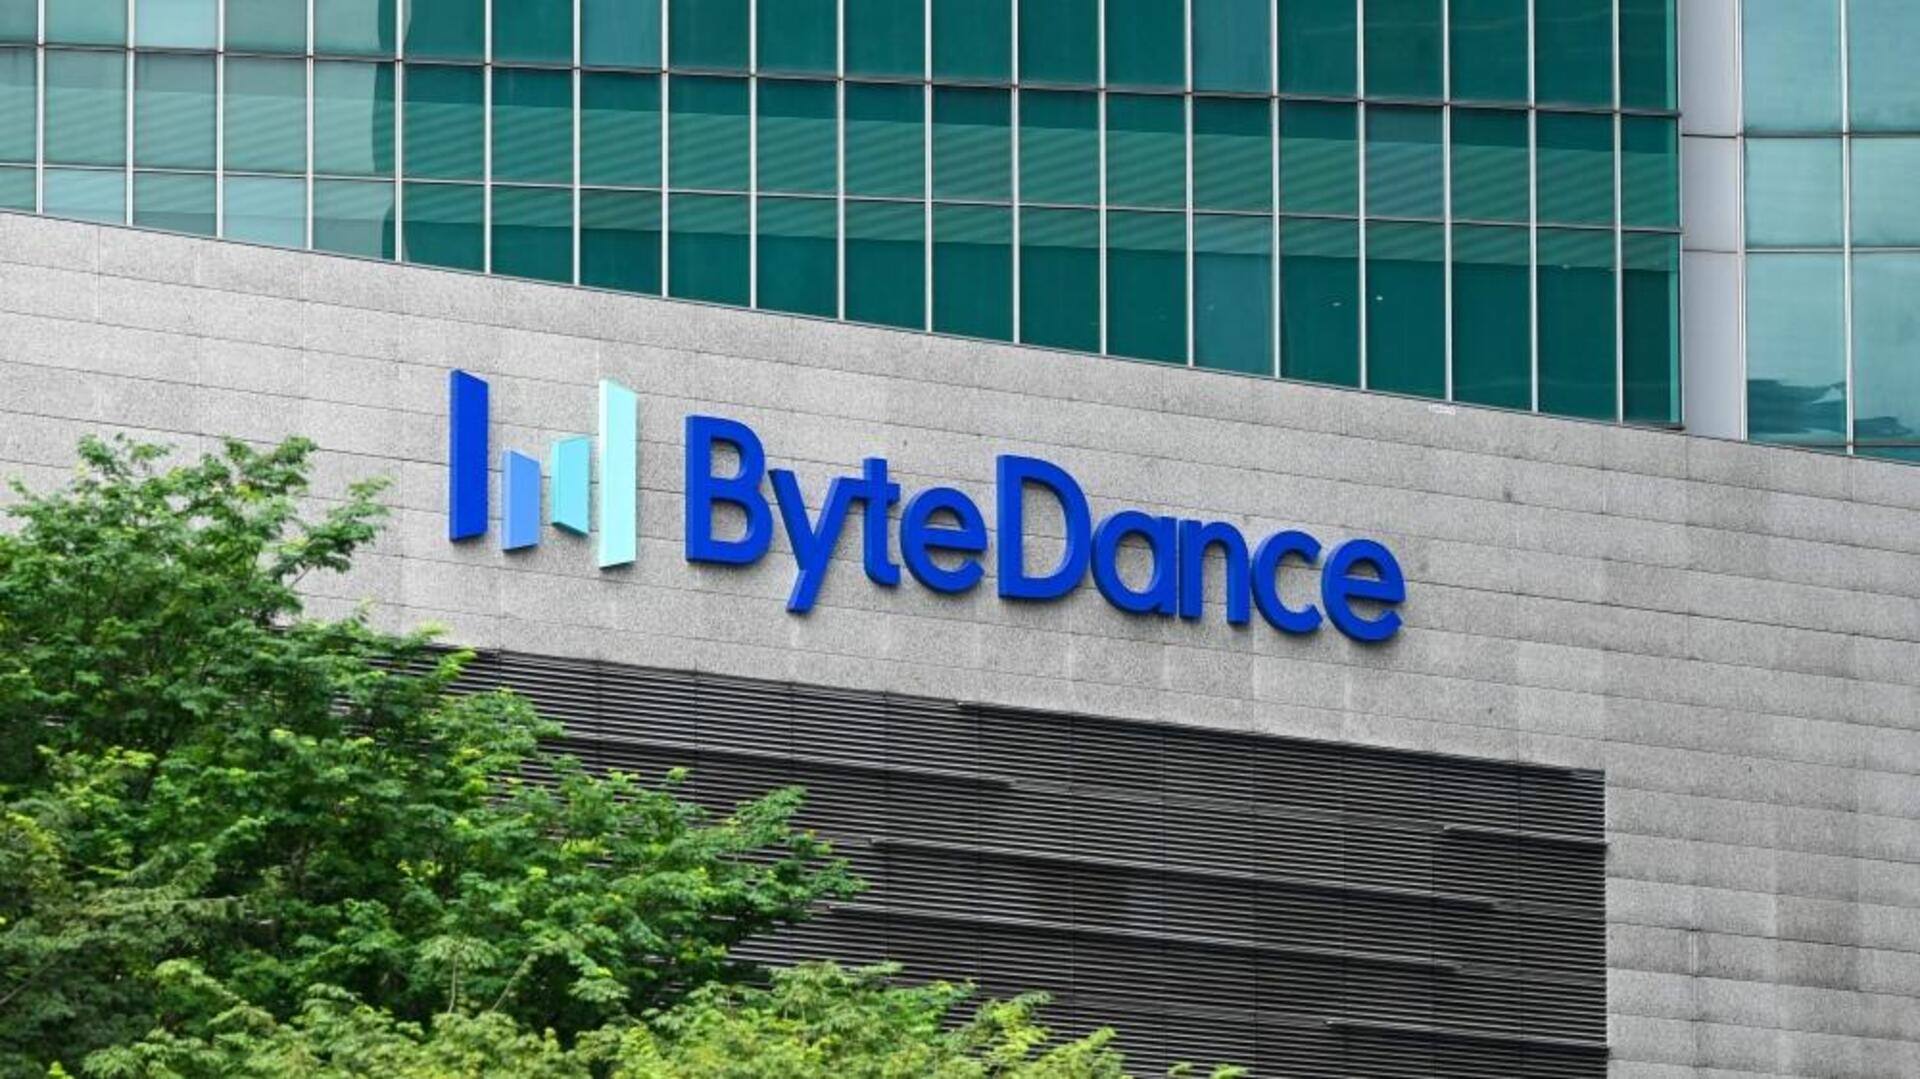 TikTok-owner ByteDance in talks to sell gaming assets to Tencent